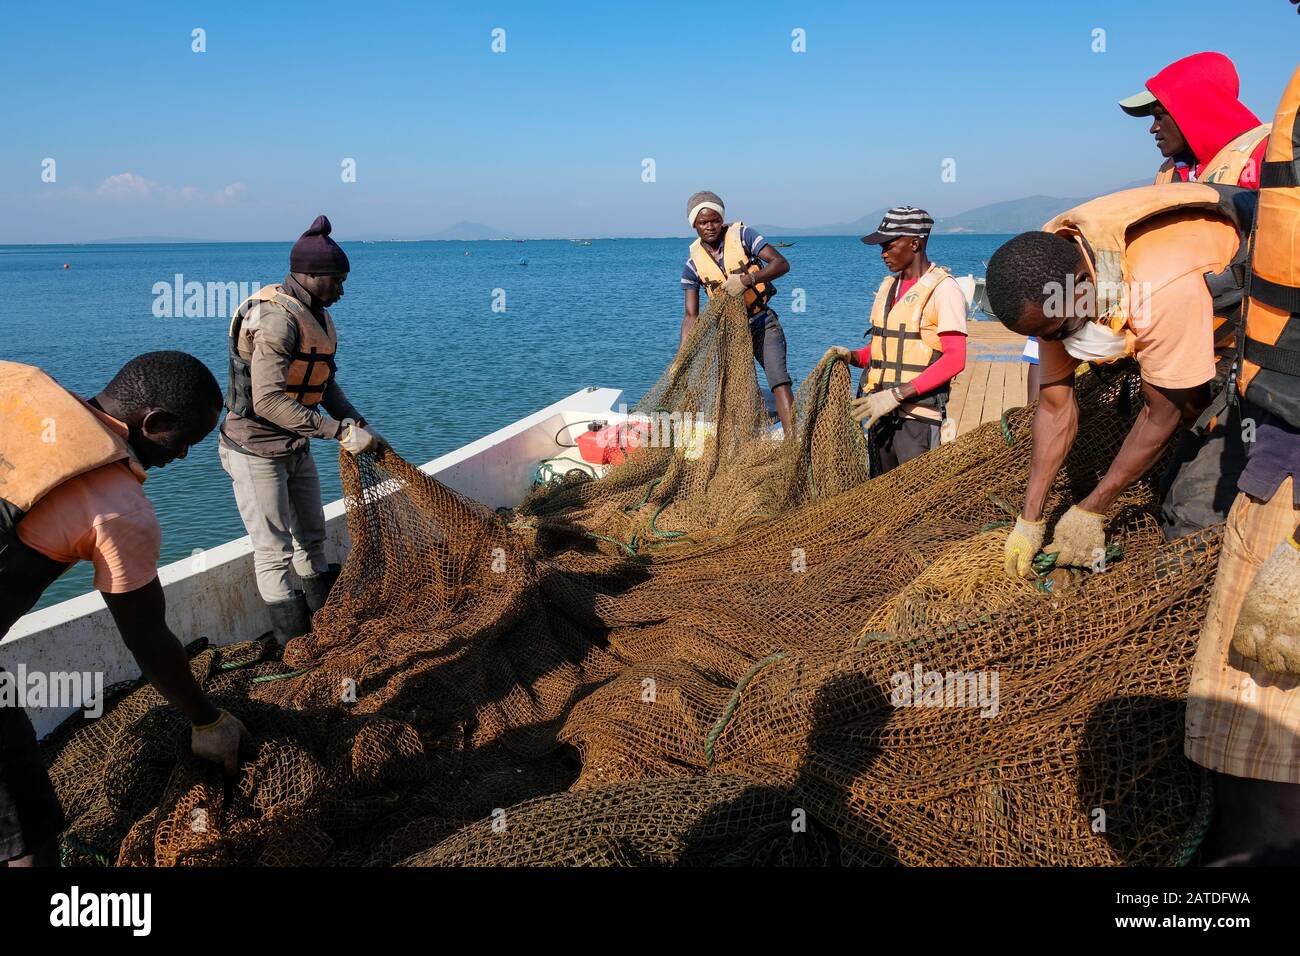 Employees of Victory Farms, the largest fish farmer in Kenya, fix netting for a fish cage in Lake Victoria Stock Photo